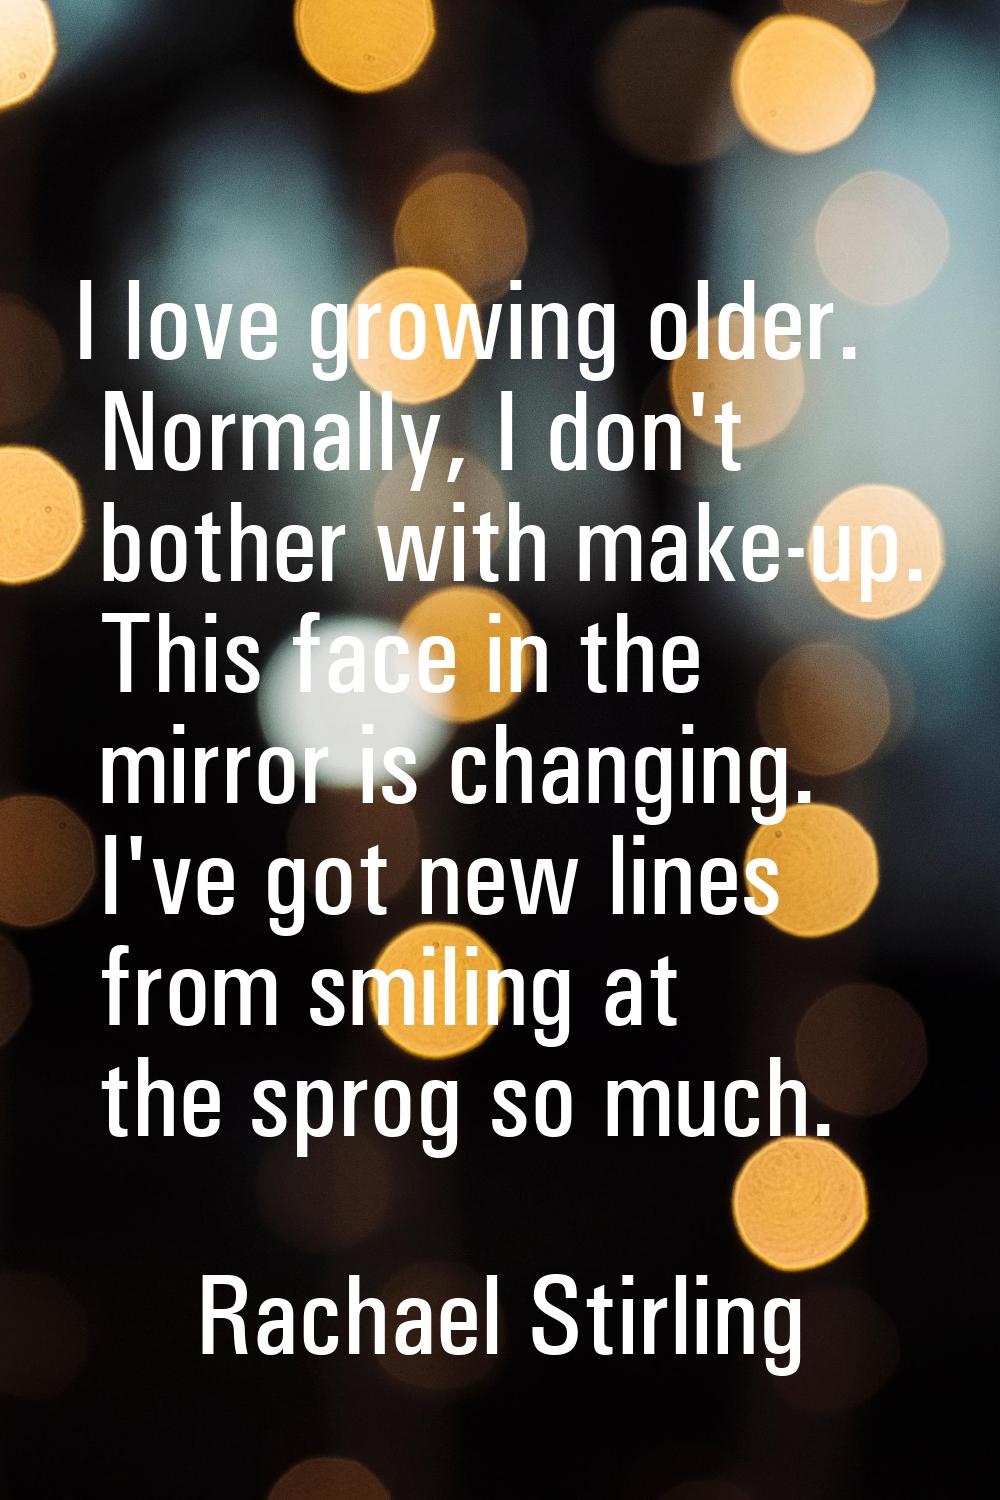 I love growing older. Normally, I don't bother with make-up. This face in the mirror is changing. I